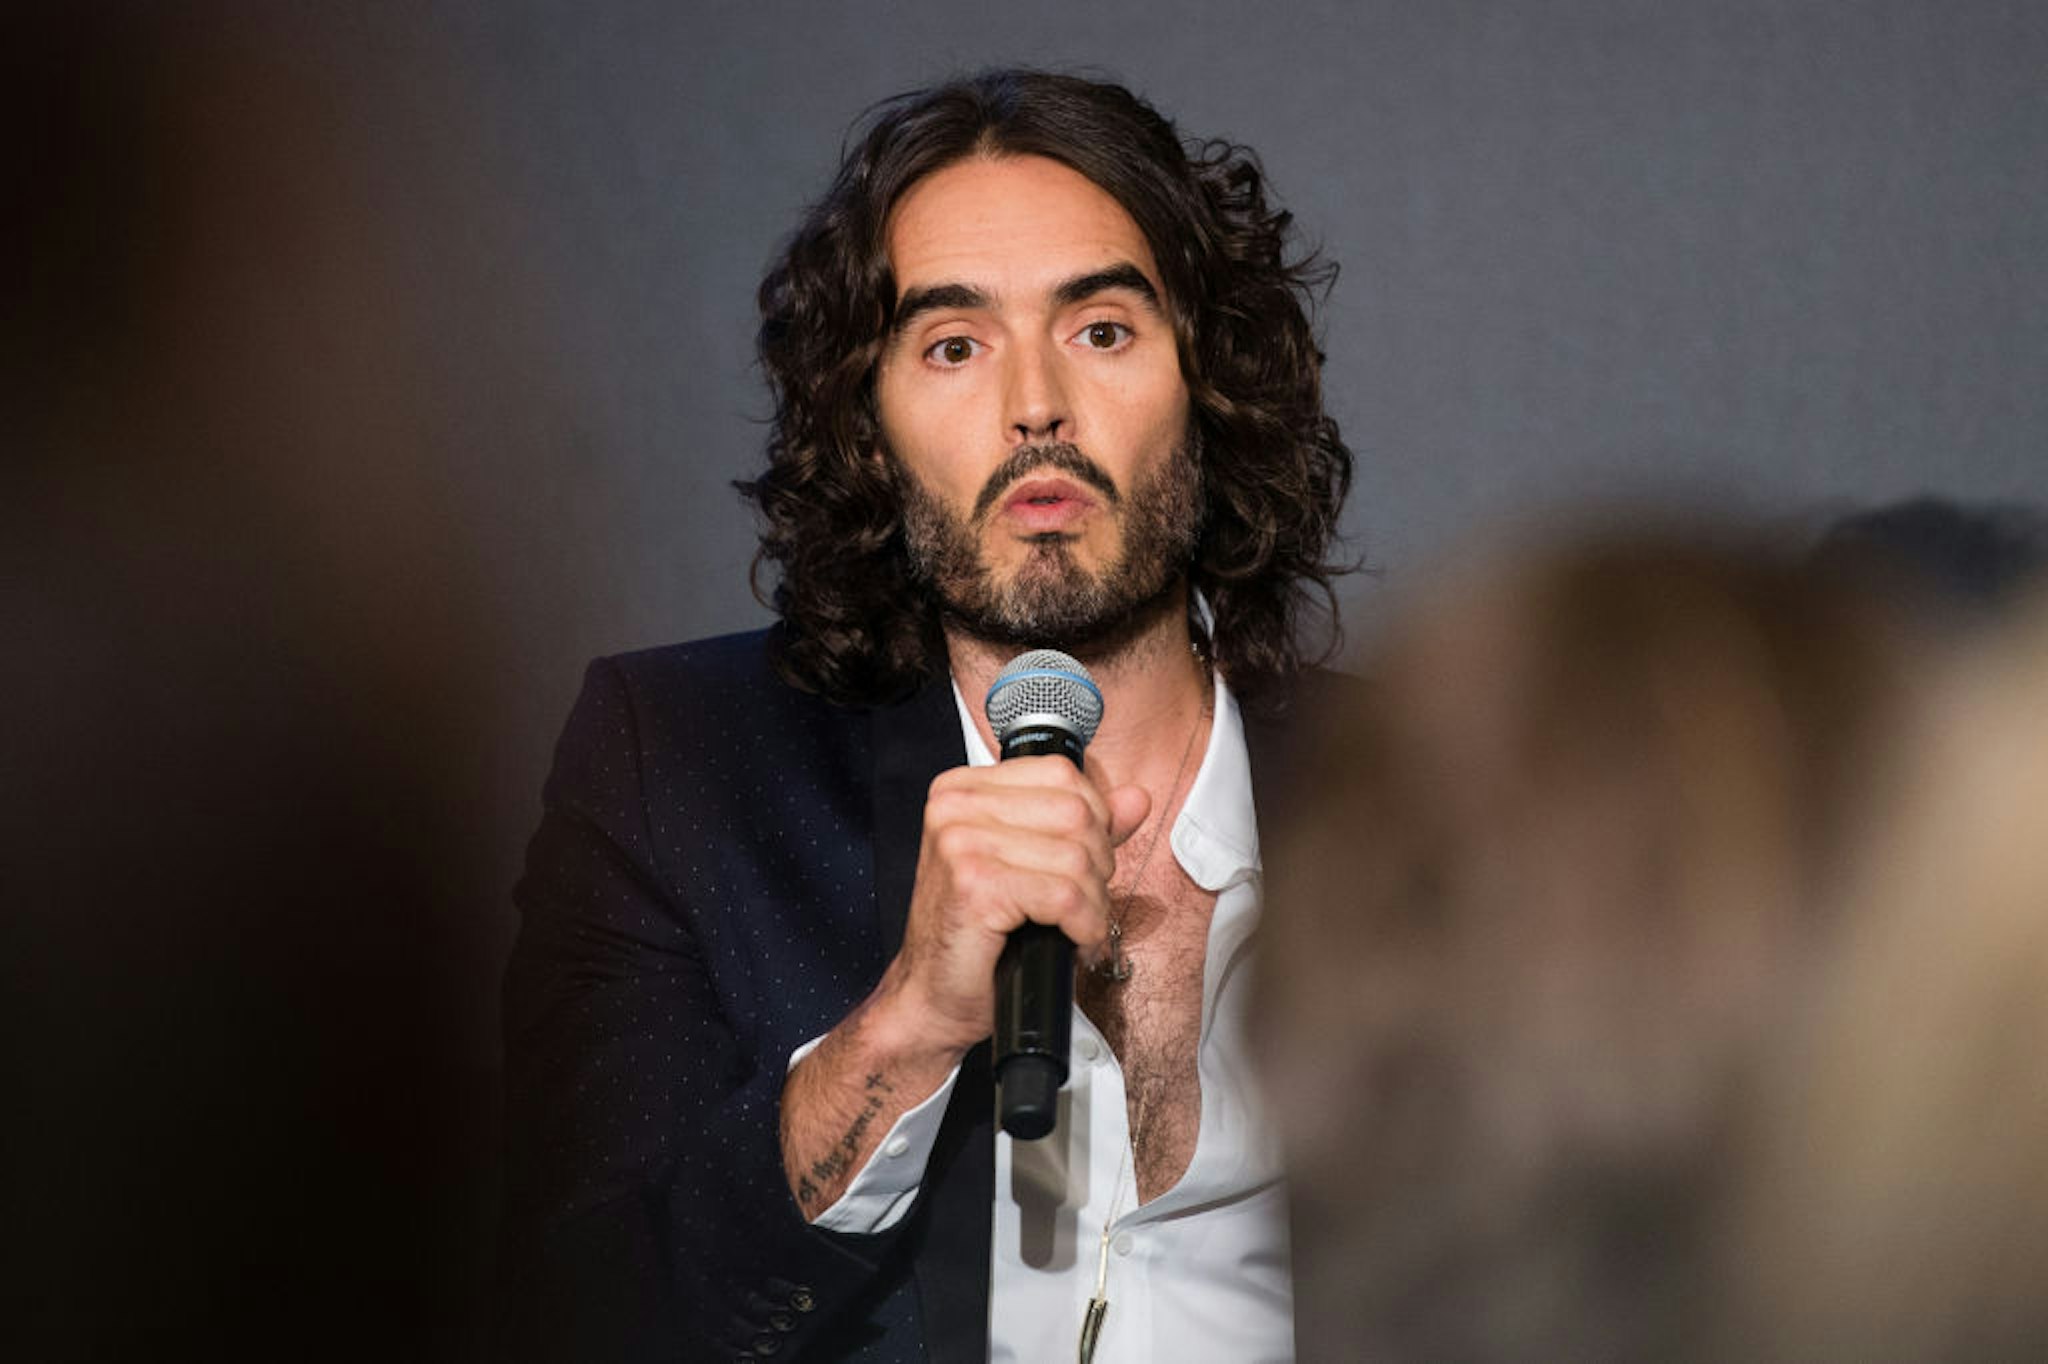 Russell Brand Vehemently Denies Sexual Assault Allegations In Viral